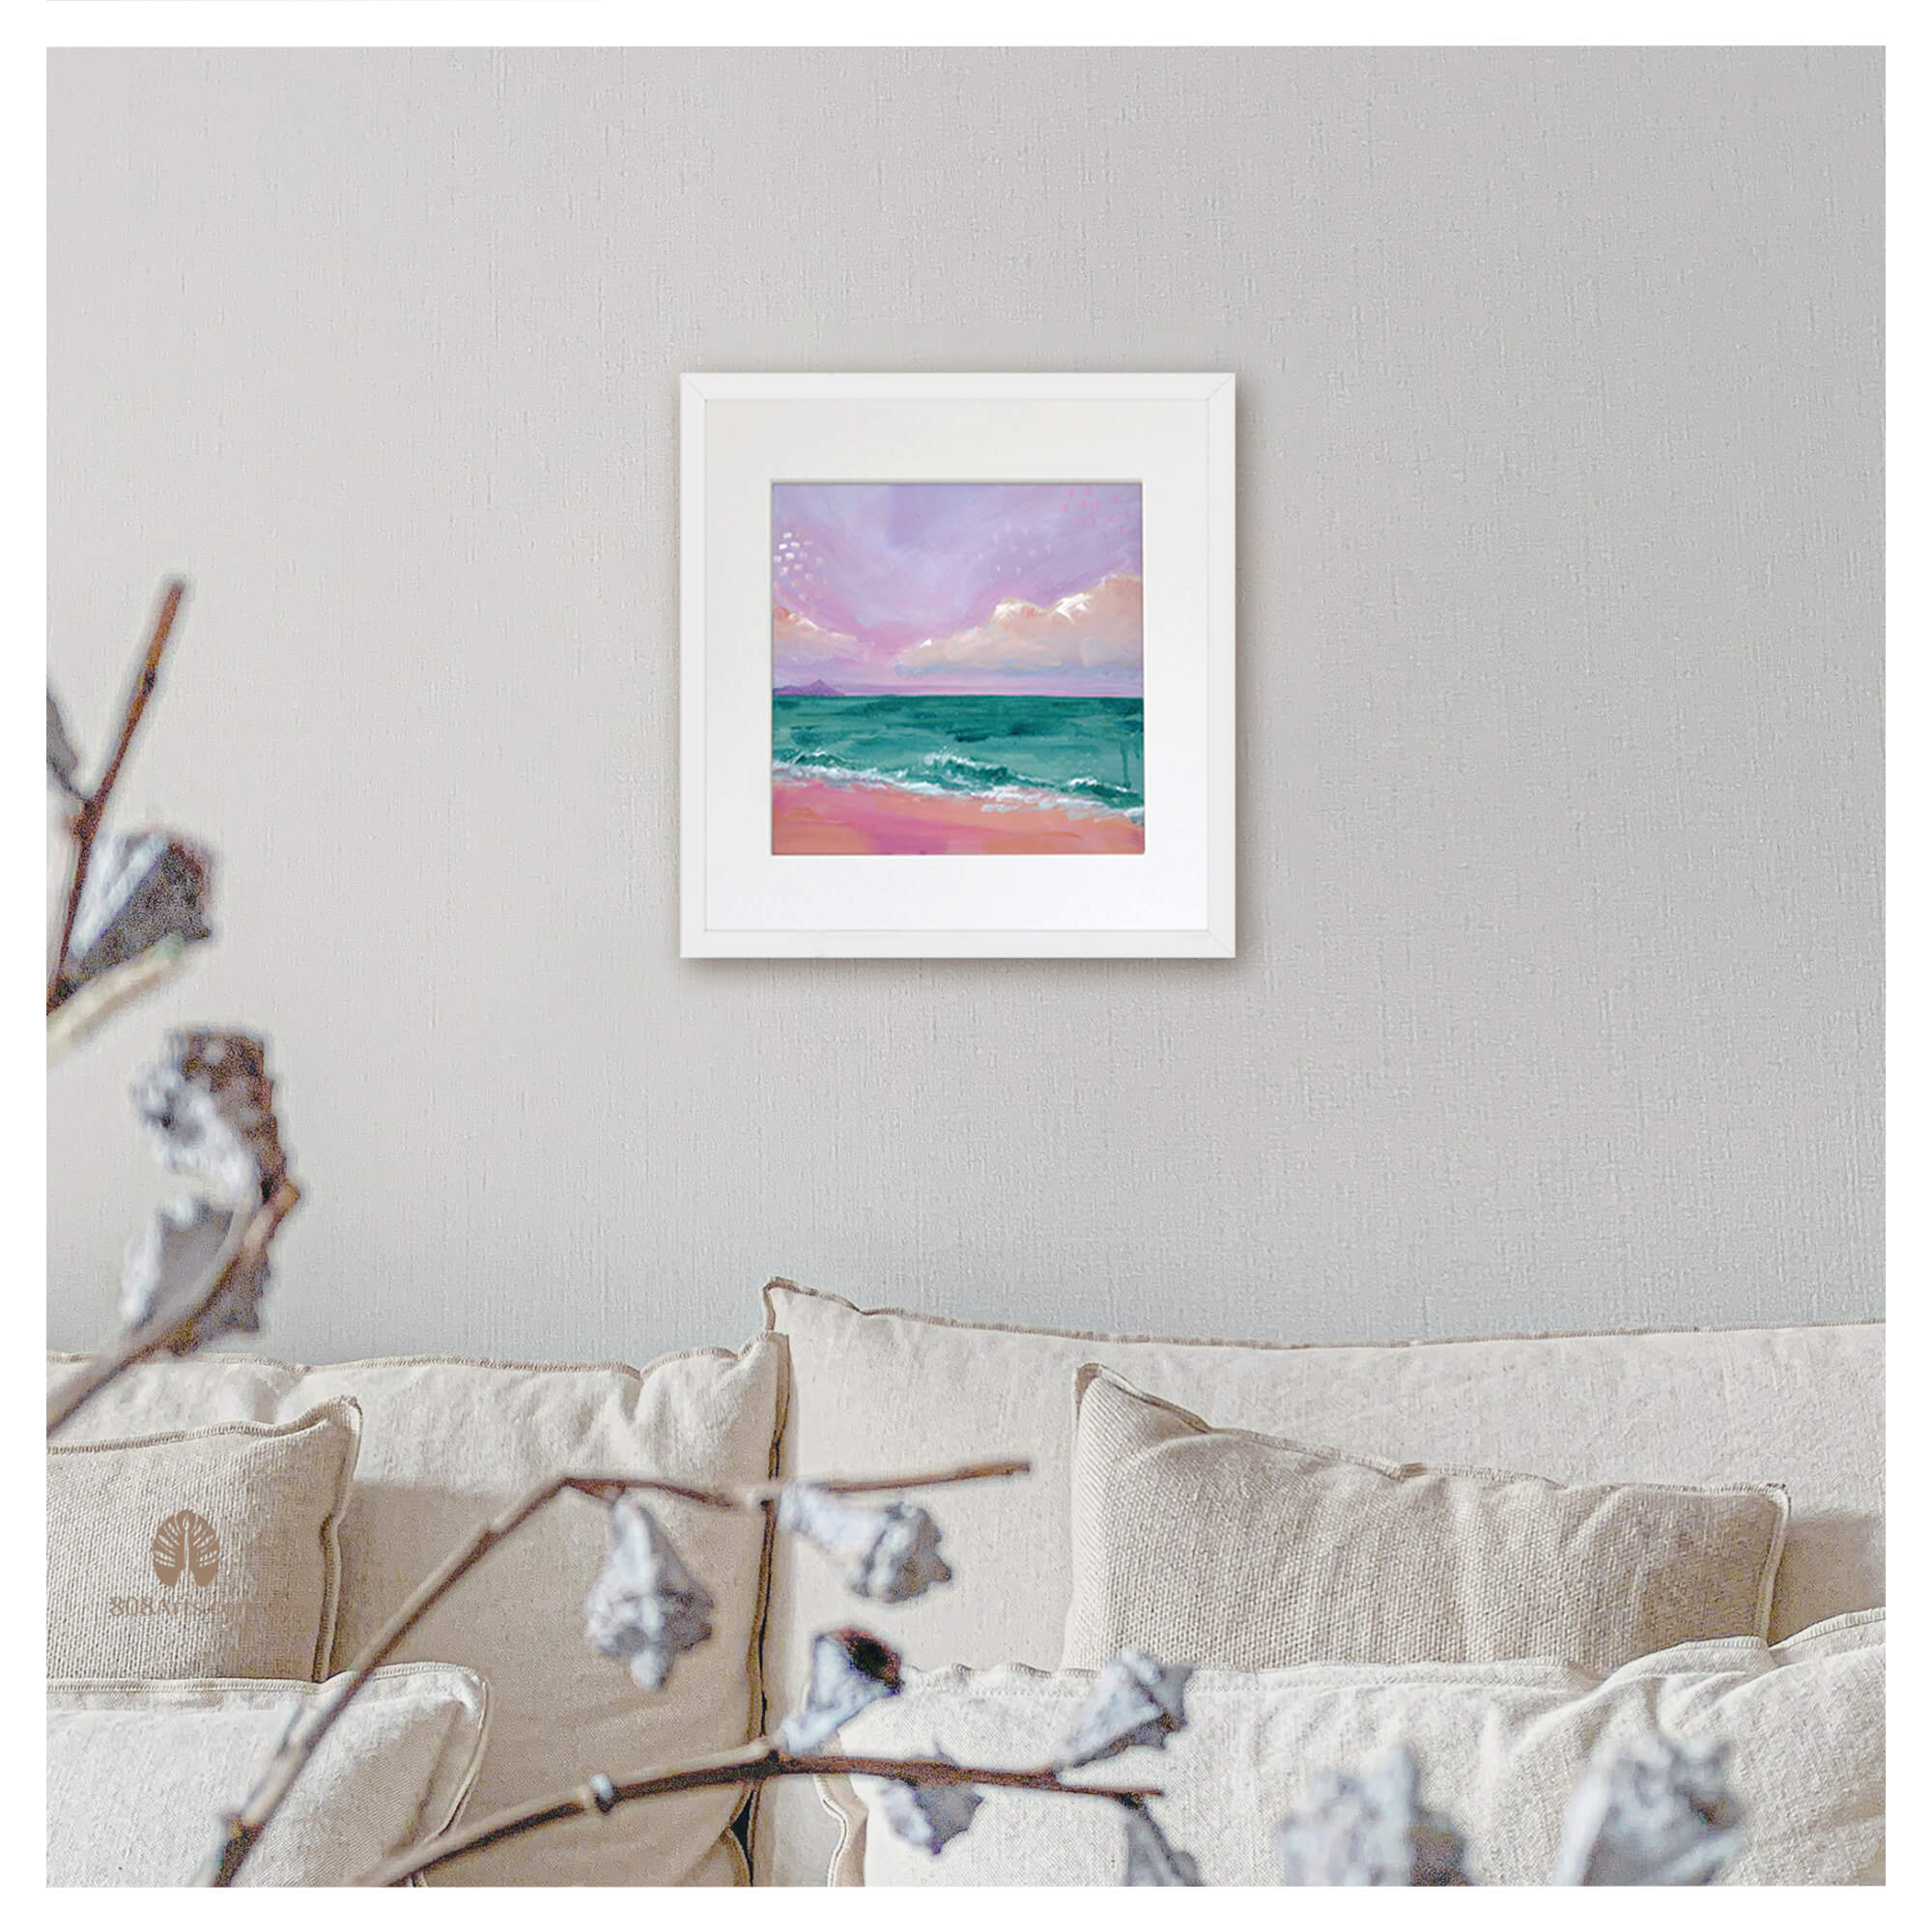 Seascape and horizon with pastel colors by Hawaii artist Lindsay Wilkins